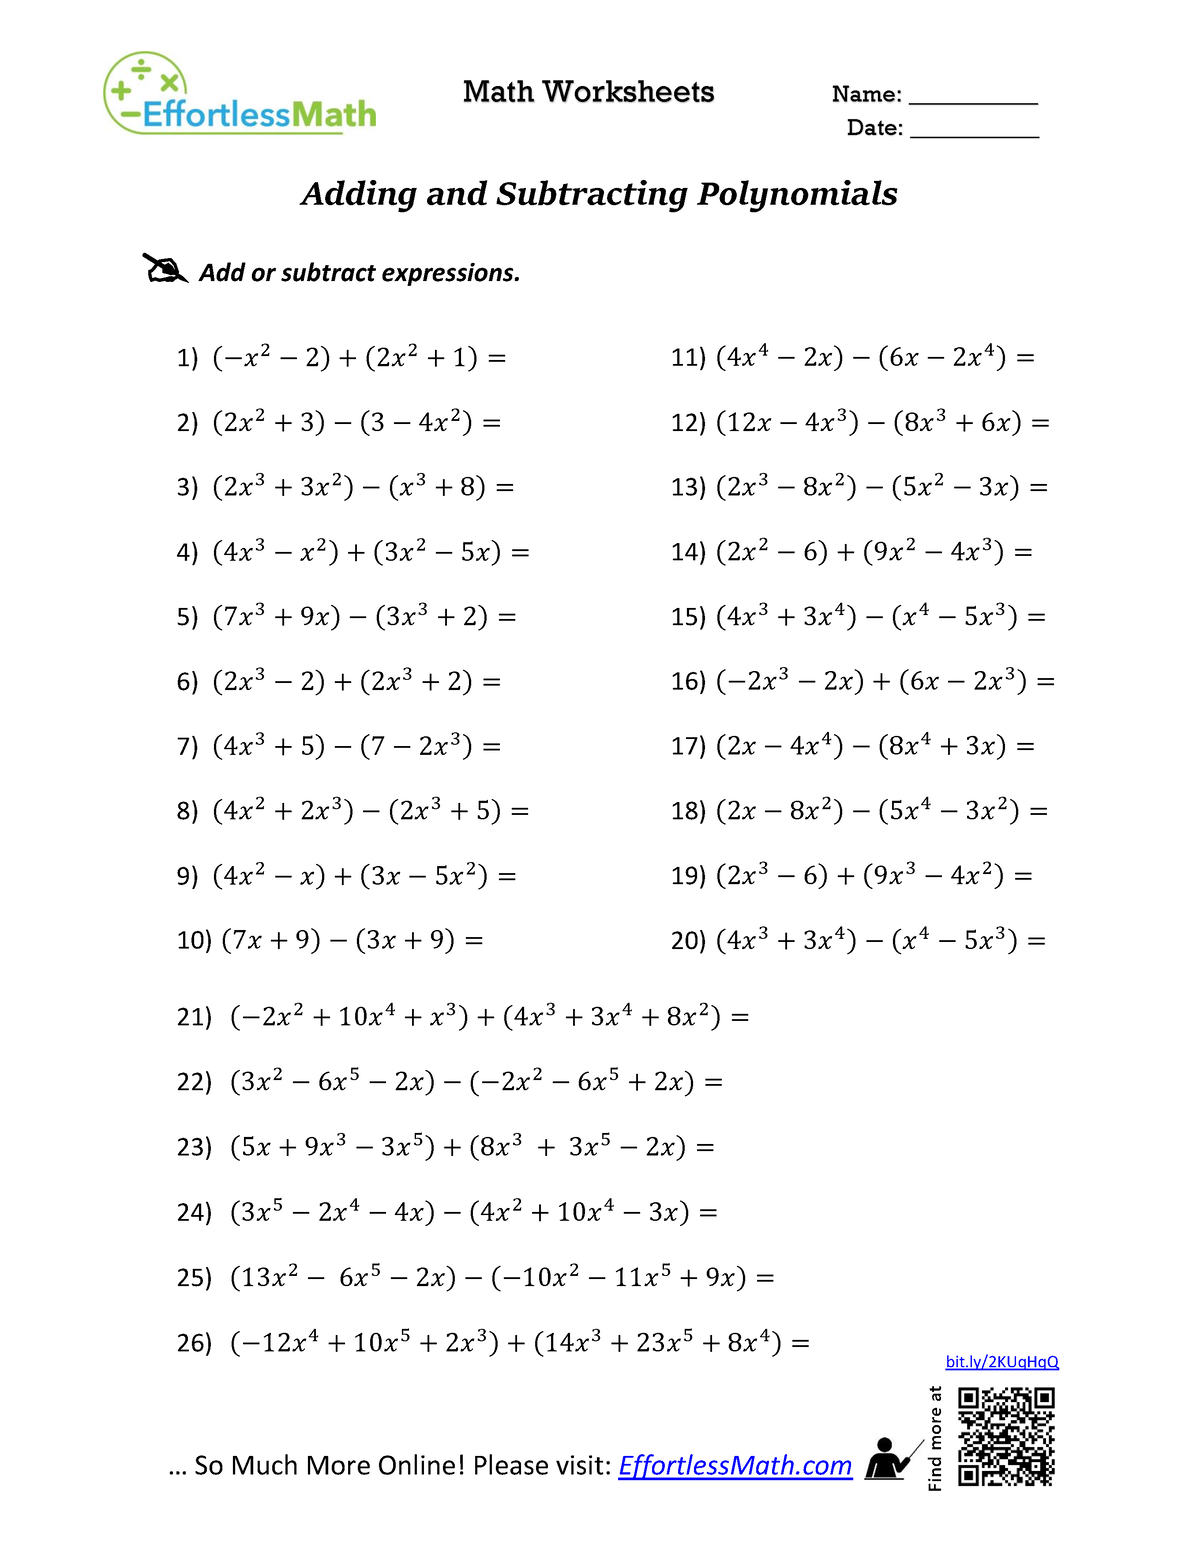 adding-and-subtracting-polynomials-math-worksheets-name